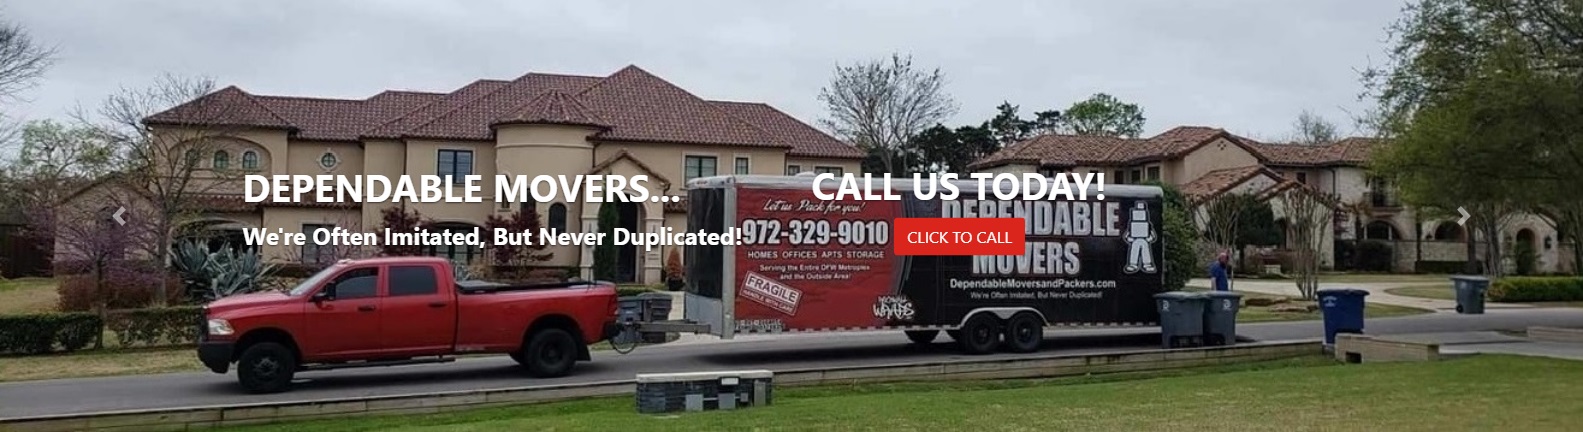 Dependable Movers Plano Mover Plano Moving Company - Home Office Apartment Movers Residential Commercial Movers in Plano Texas